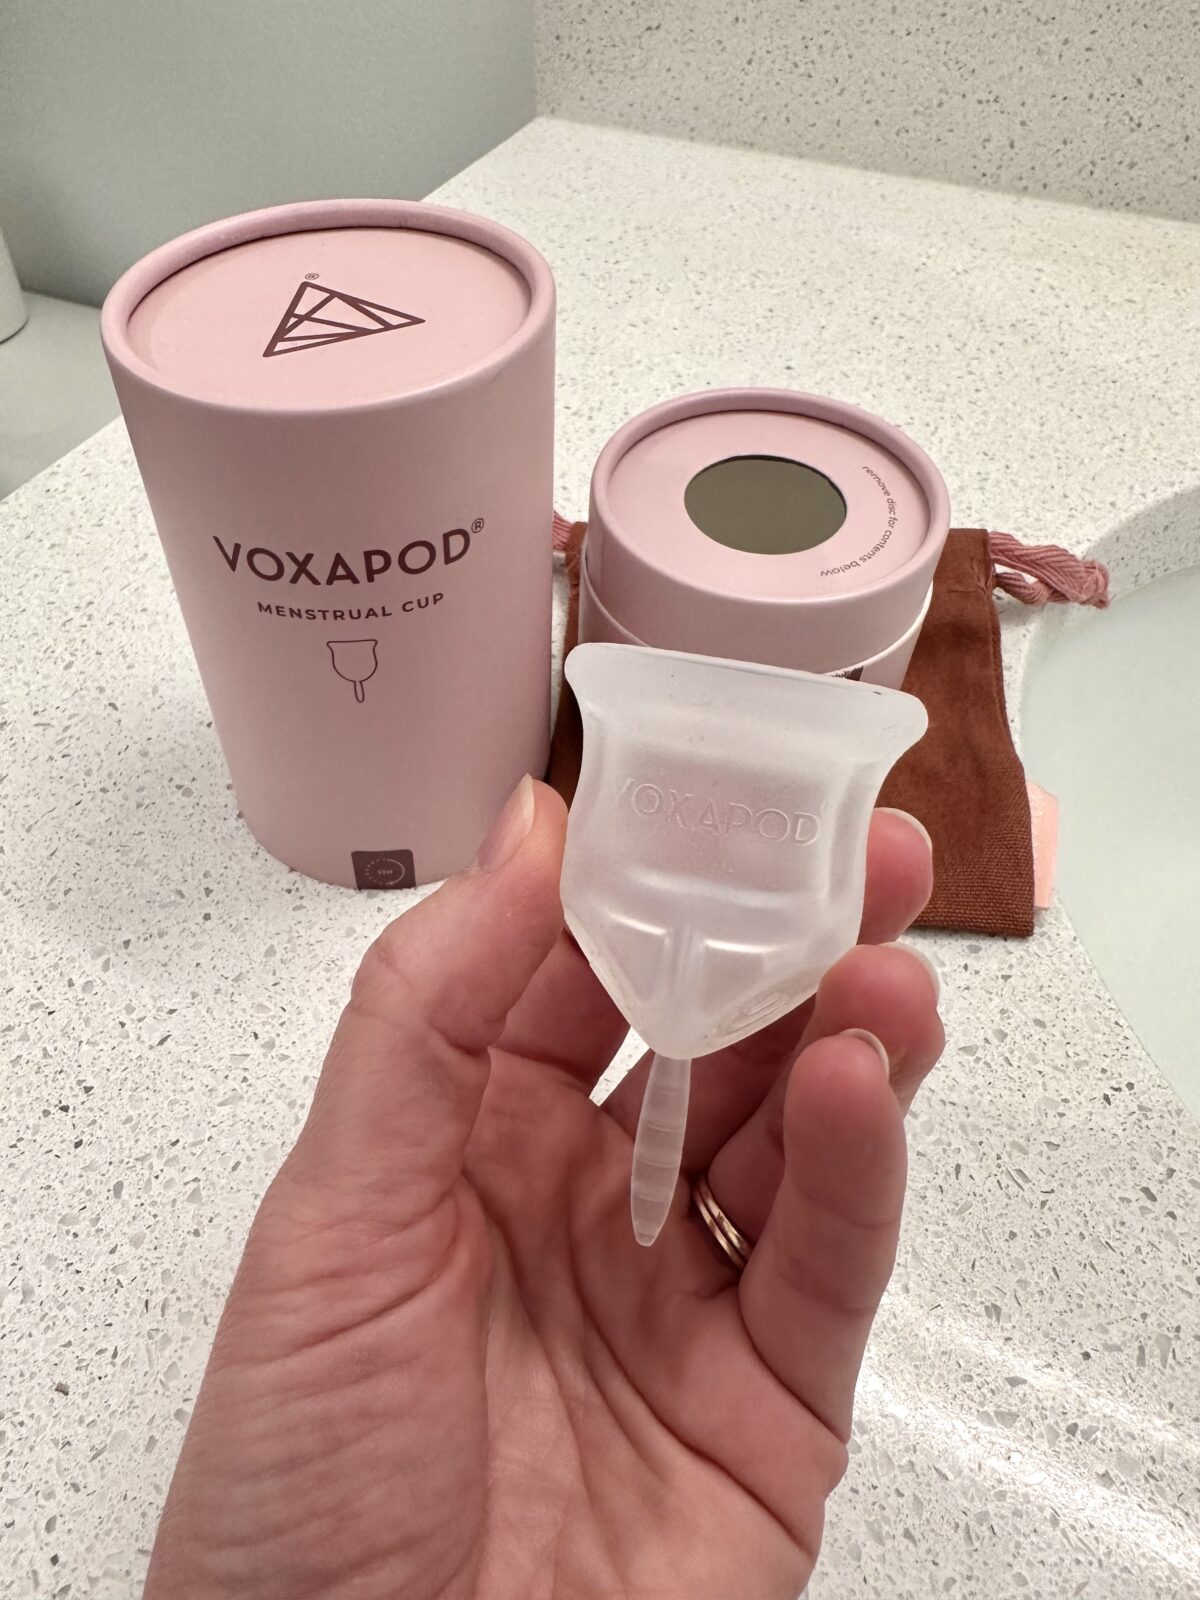 non toxic menstrual cup from Voxapod on TheFiltery.com